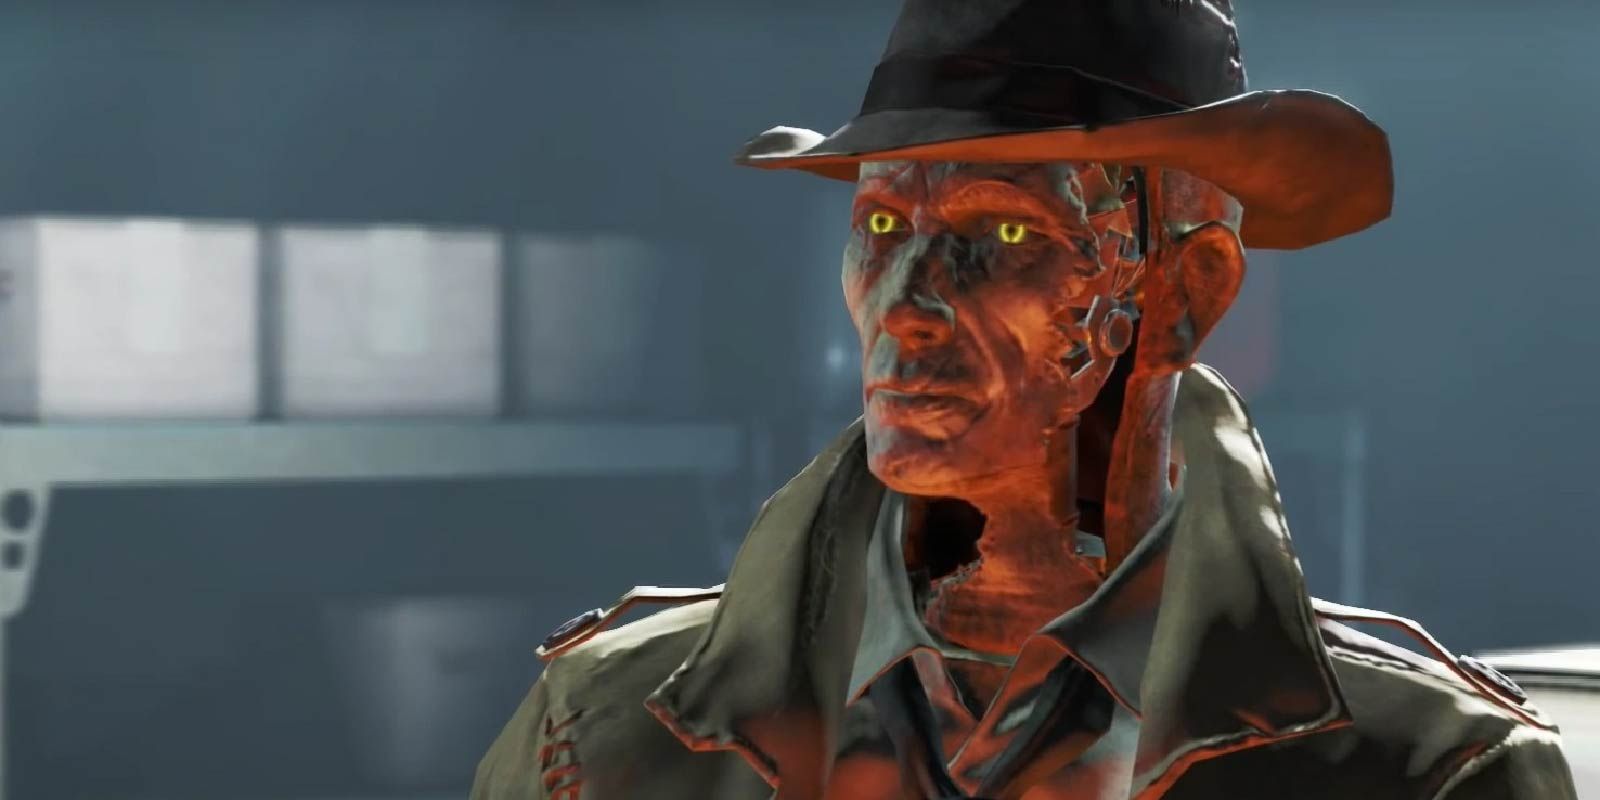 Nick Valentine in a dimly lit room in Fallout 4.